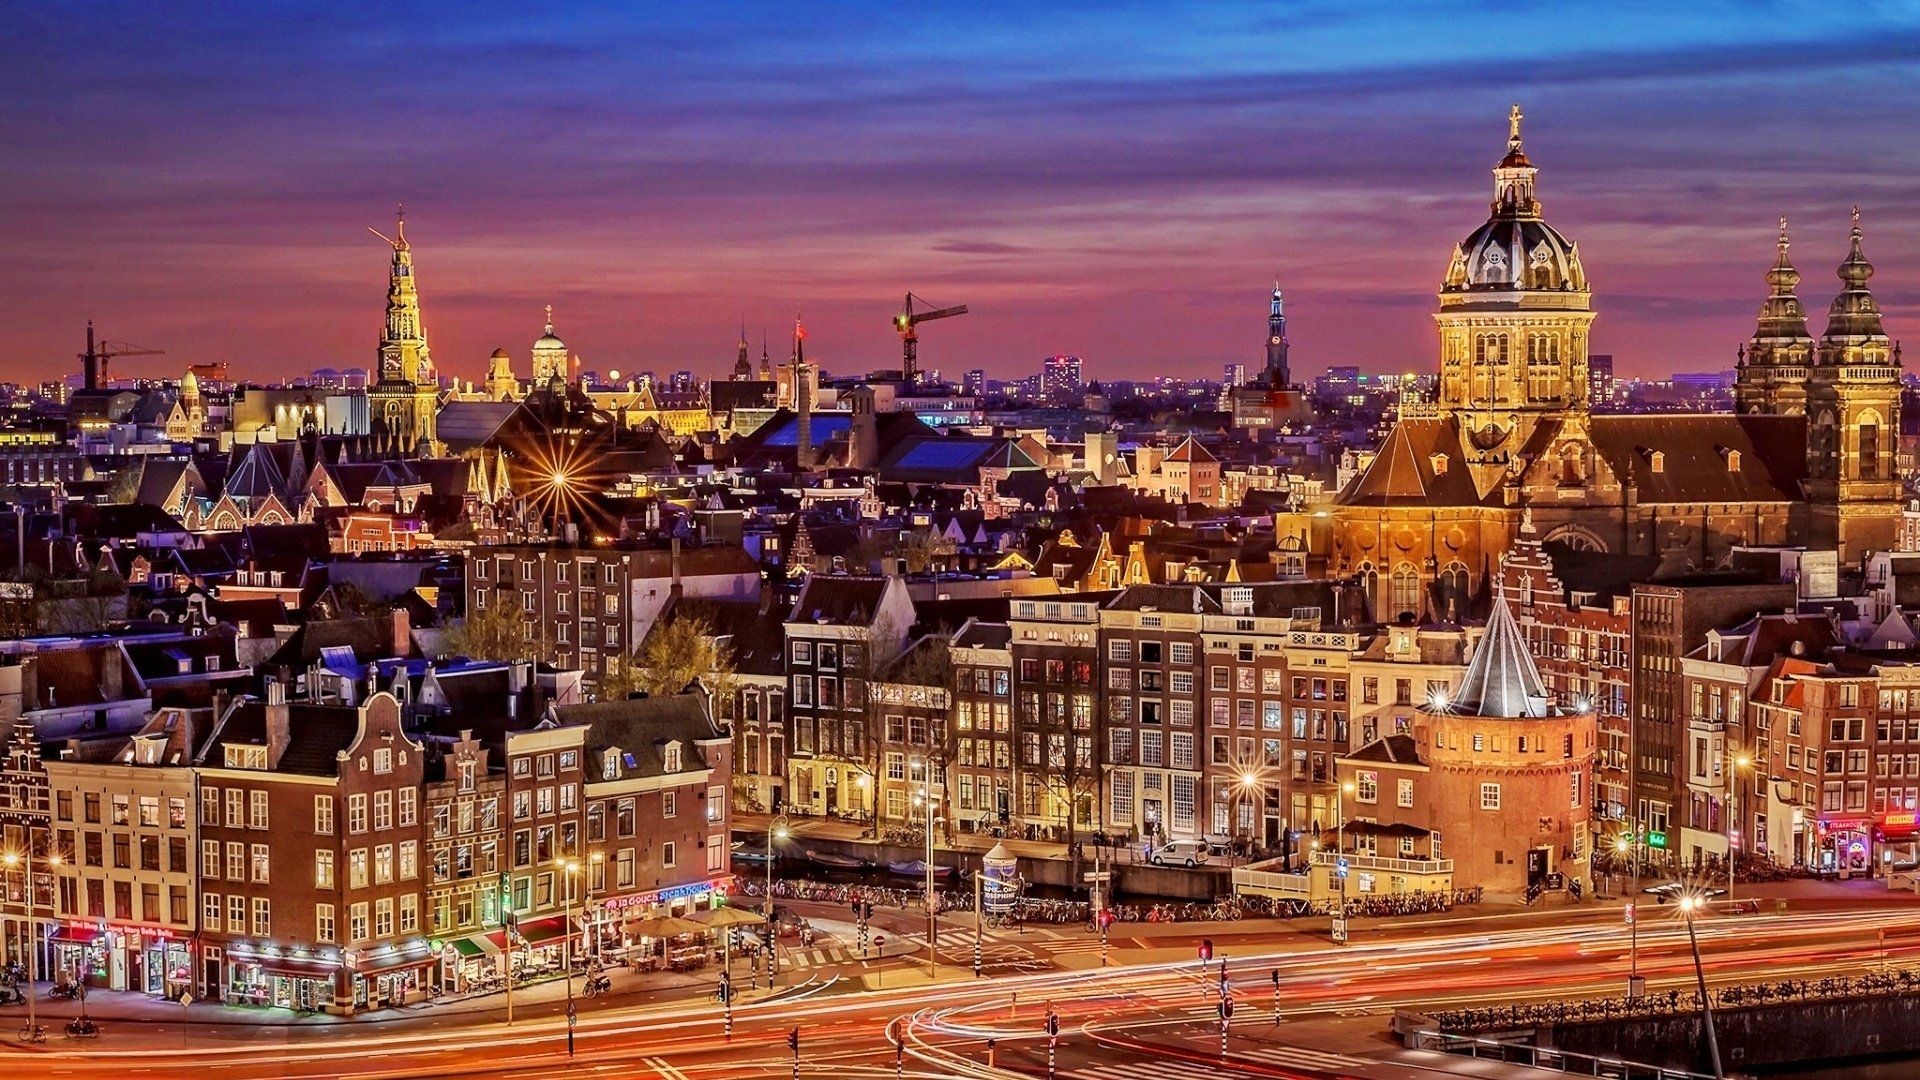 Amsterdam skyline, Popular wallpapers, Top-rated backgrounds, City charm, 1920x1080 Full HD Desktop